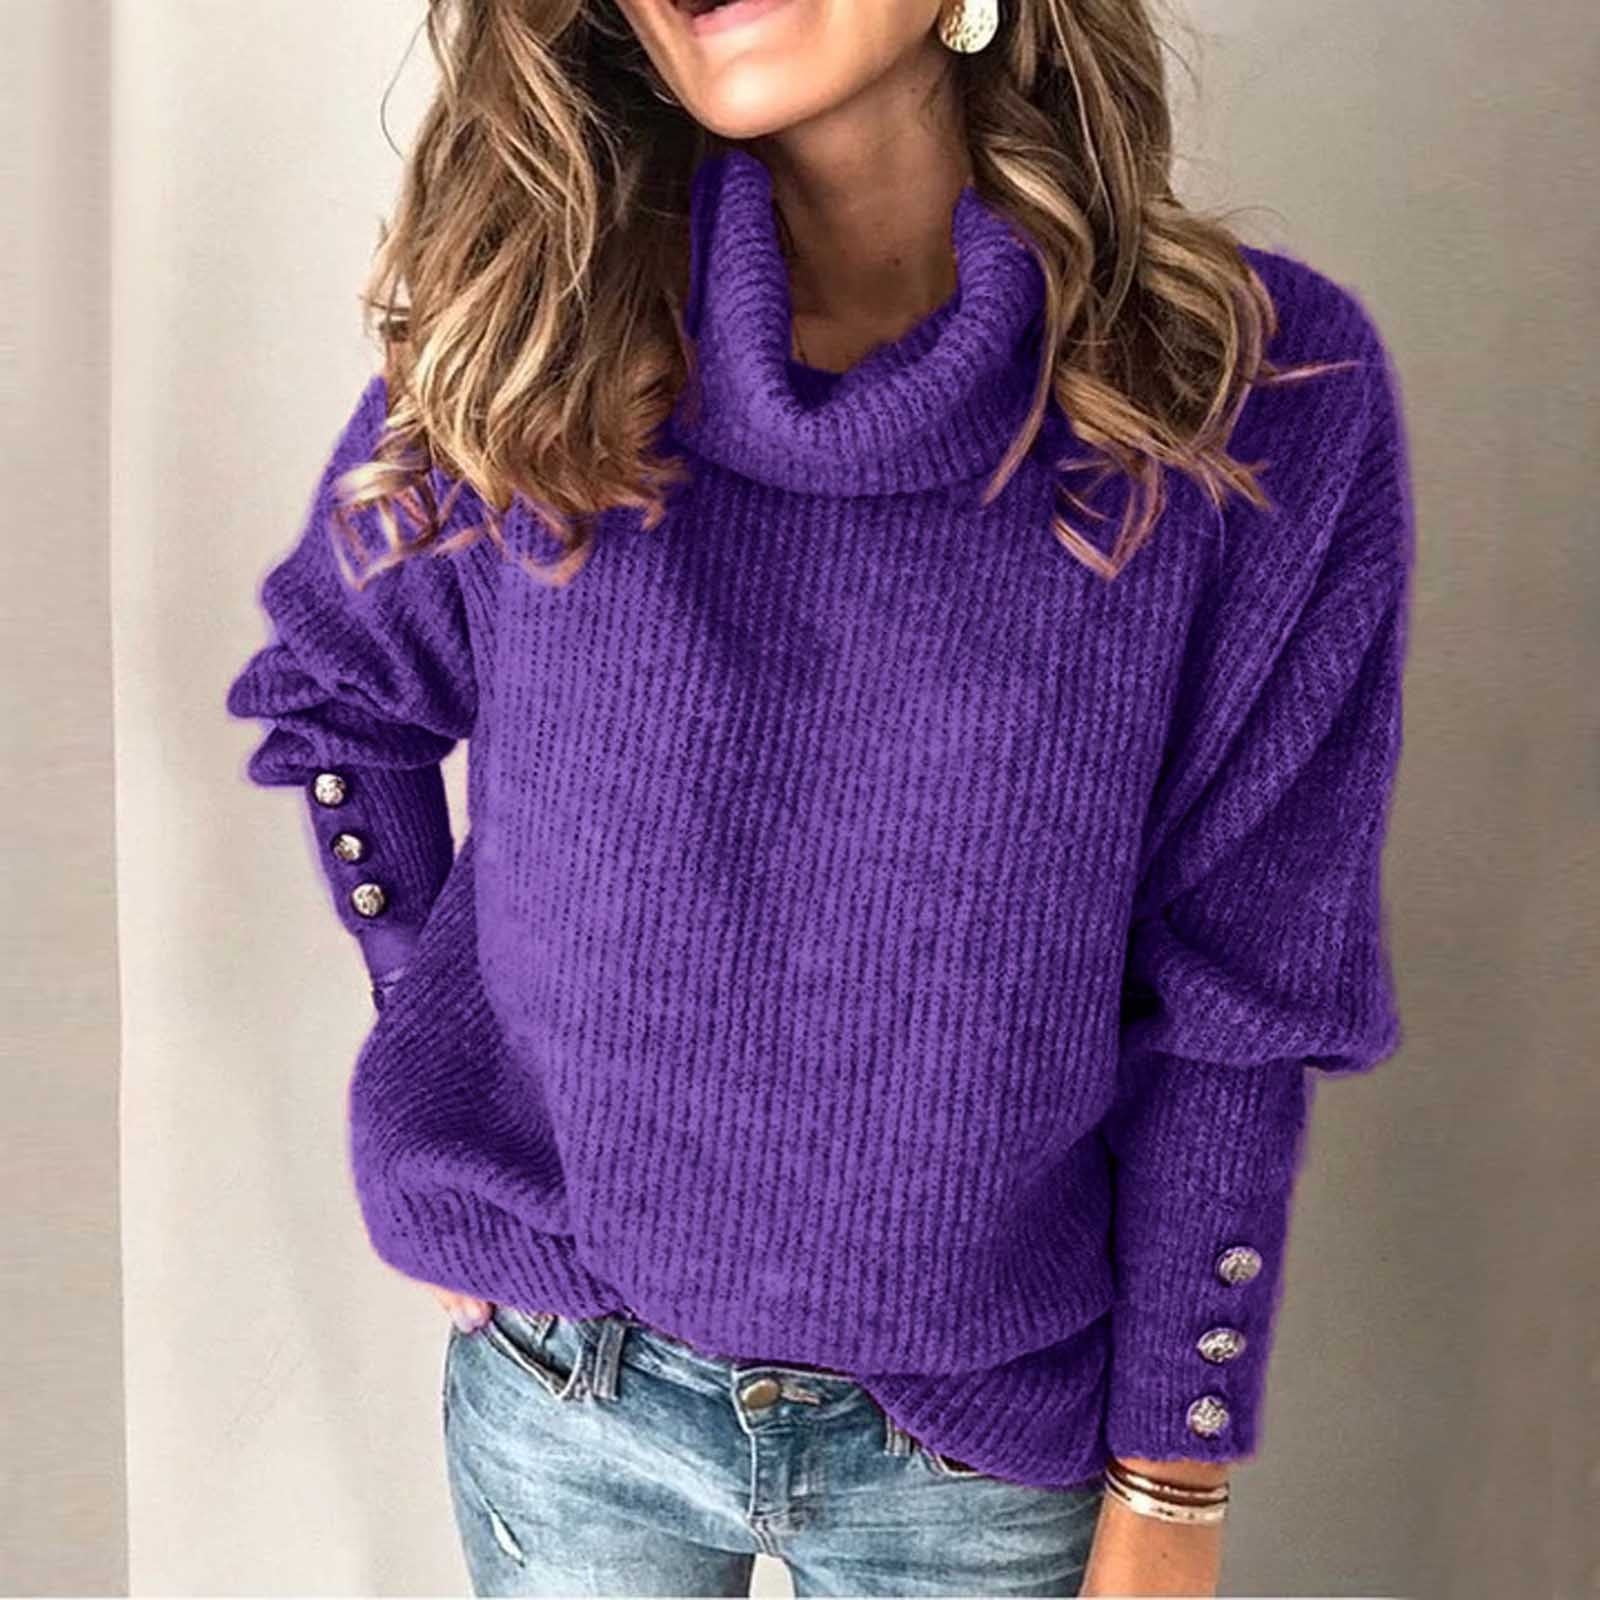 iClosam Women Turtle Neck Knitted Jumper Long Sleeve Ribbed Knitwear Slim Warm Sweater Top